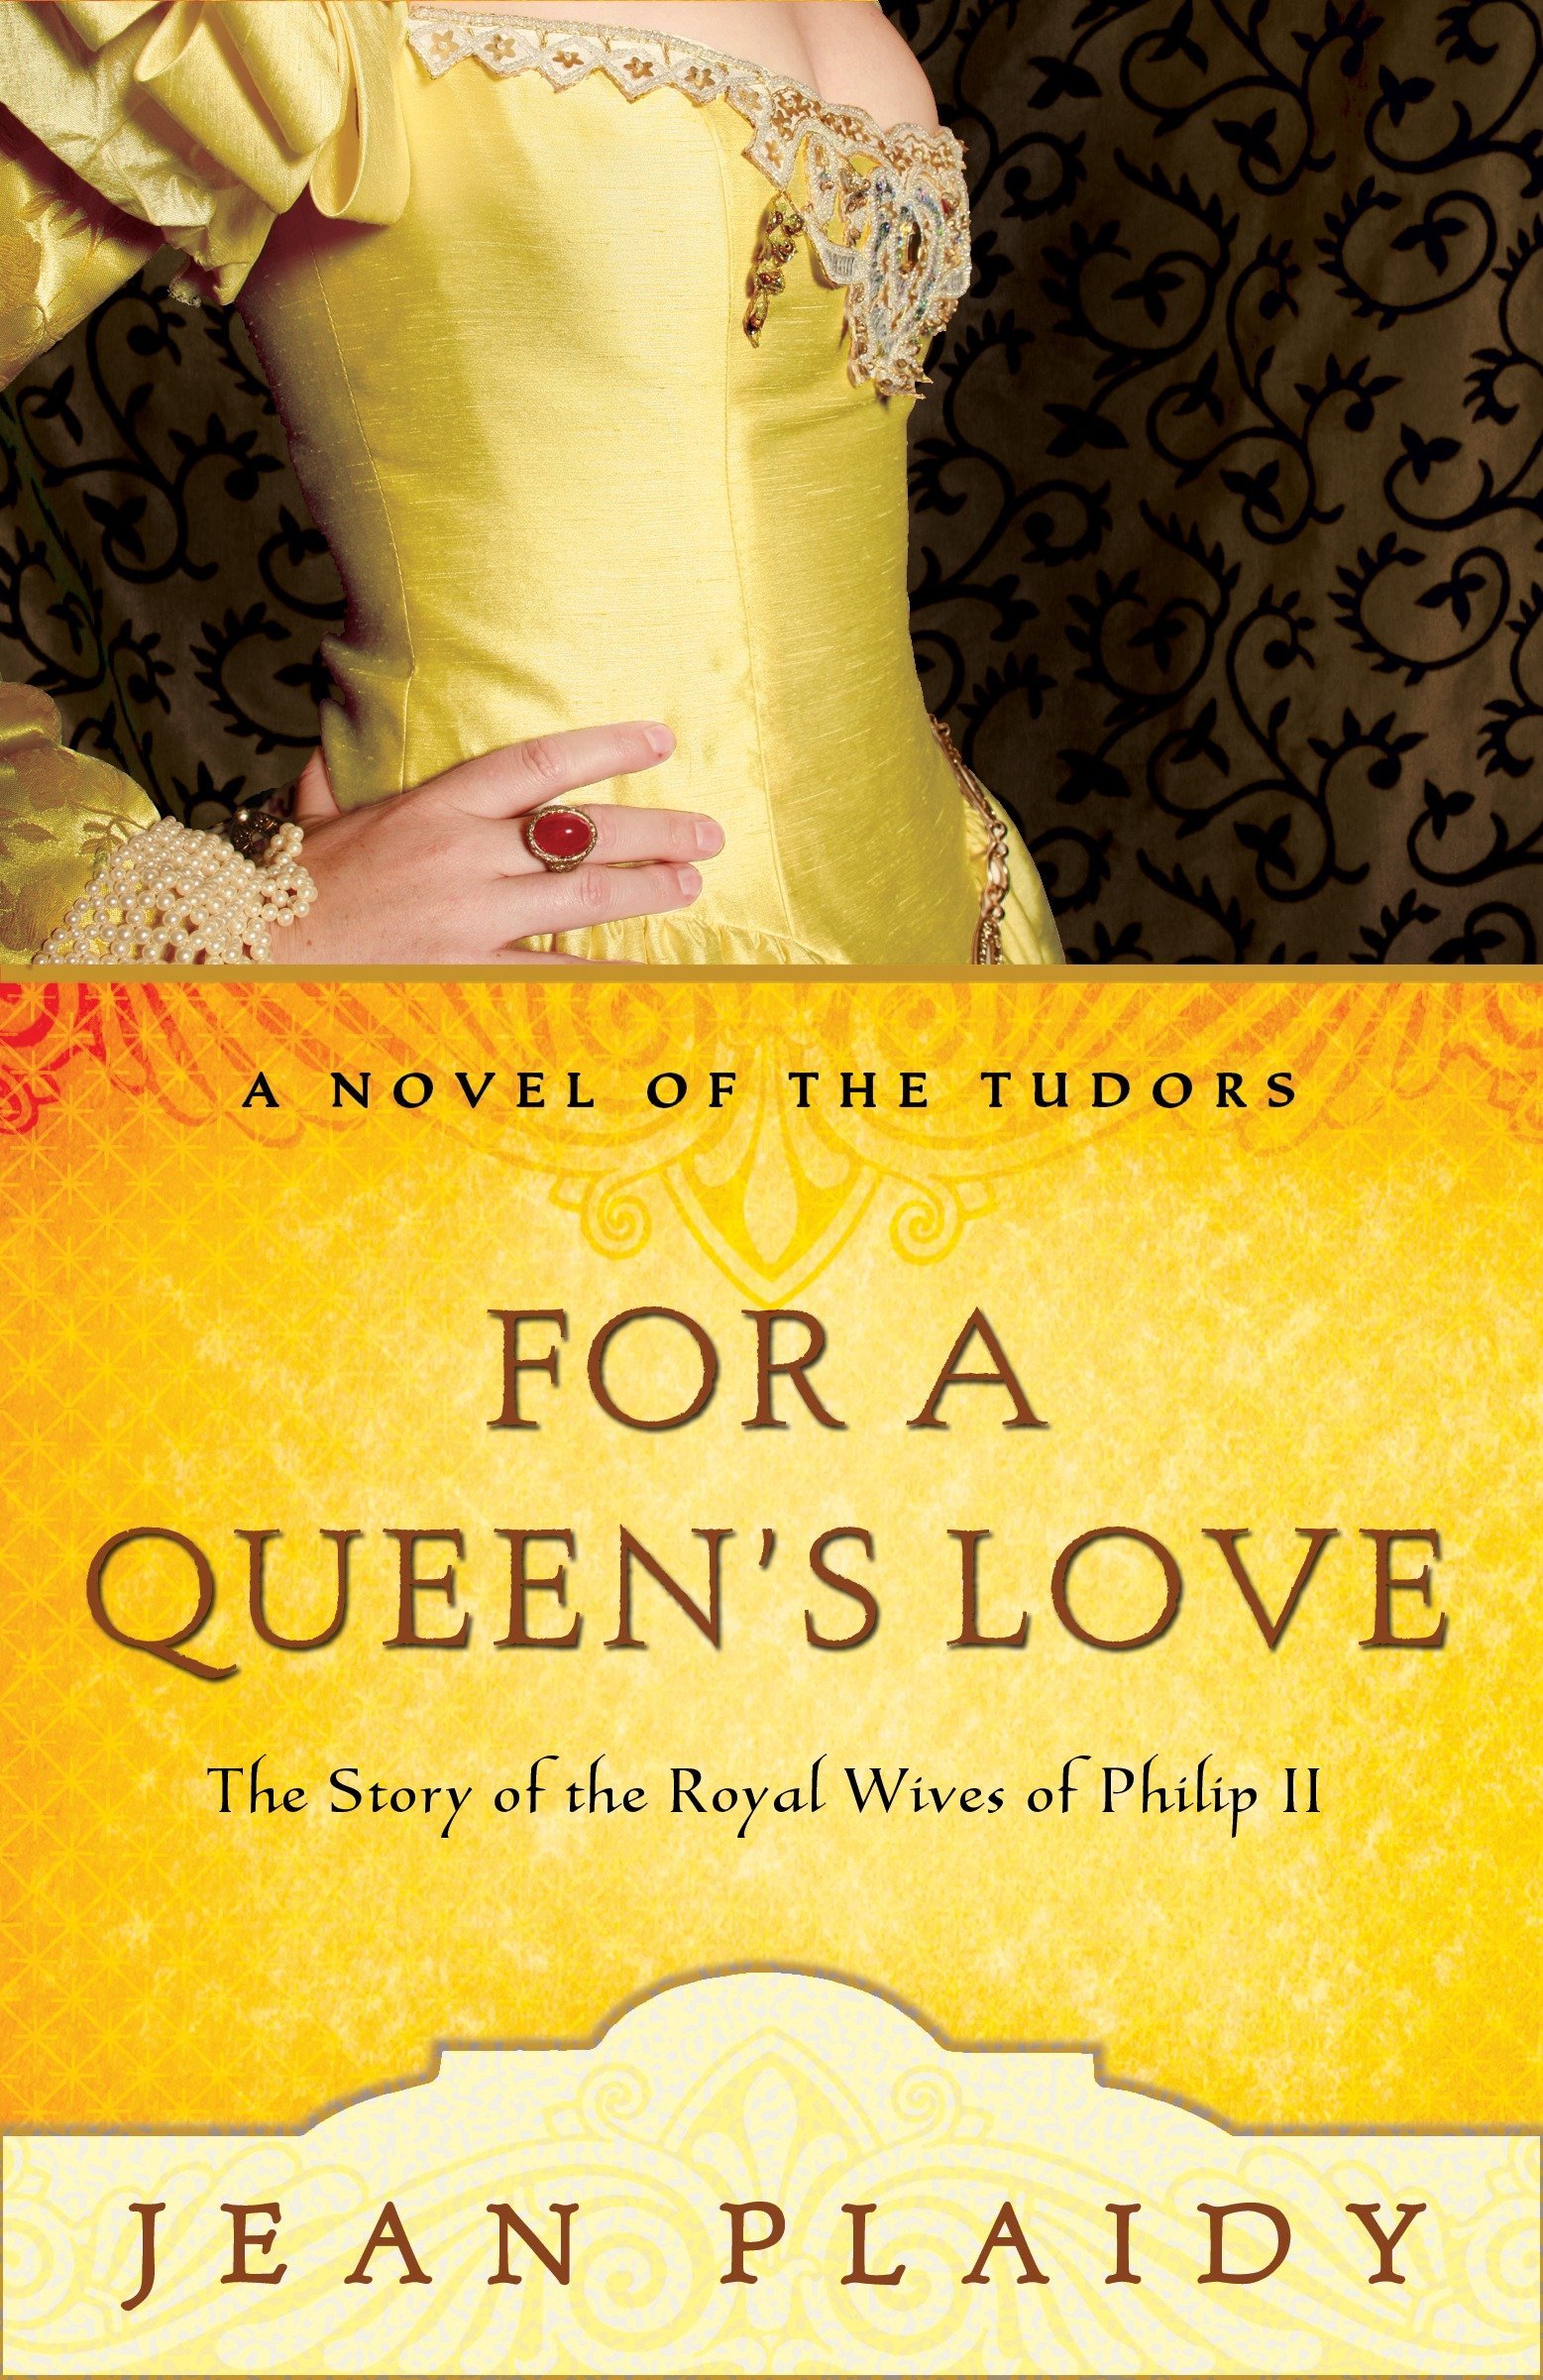 For a Queen's Love: The Stories of the Royal Wives of Philip II